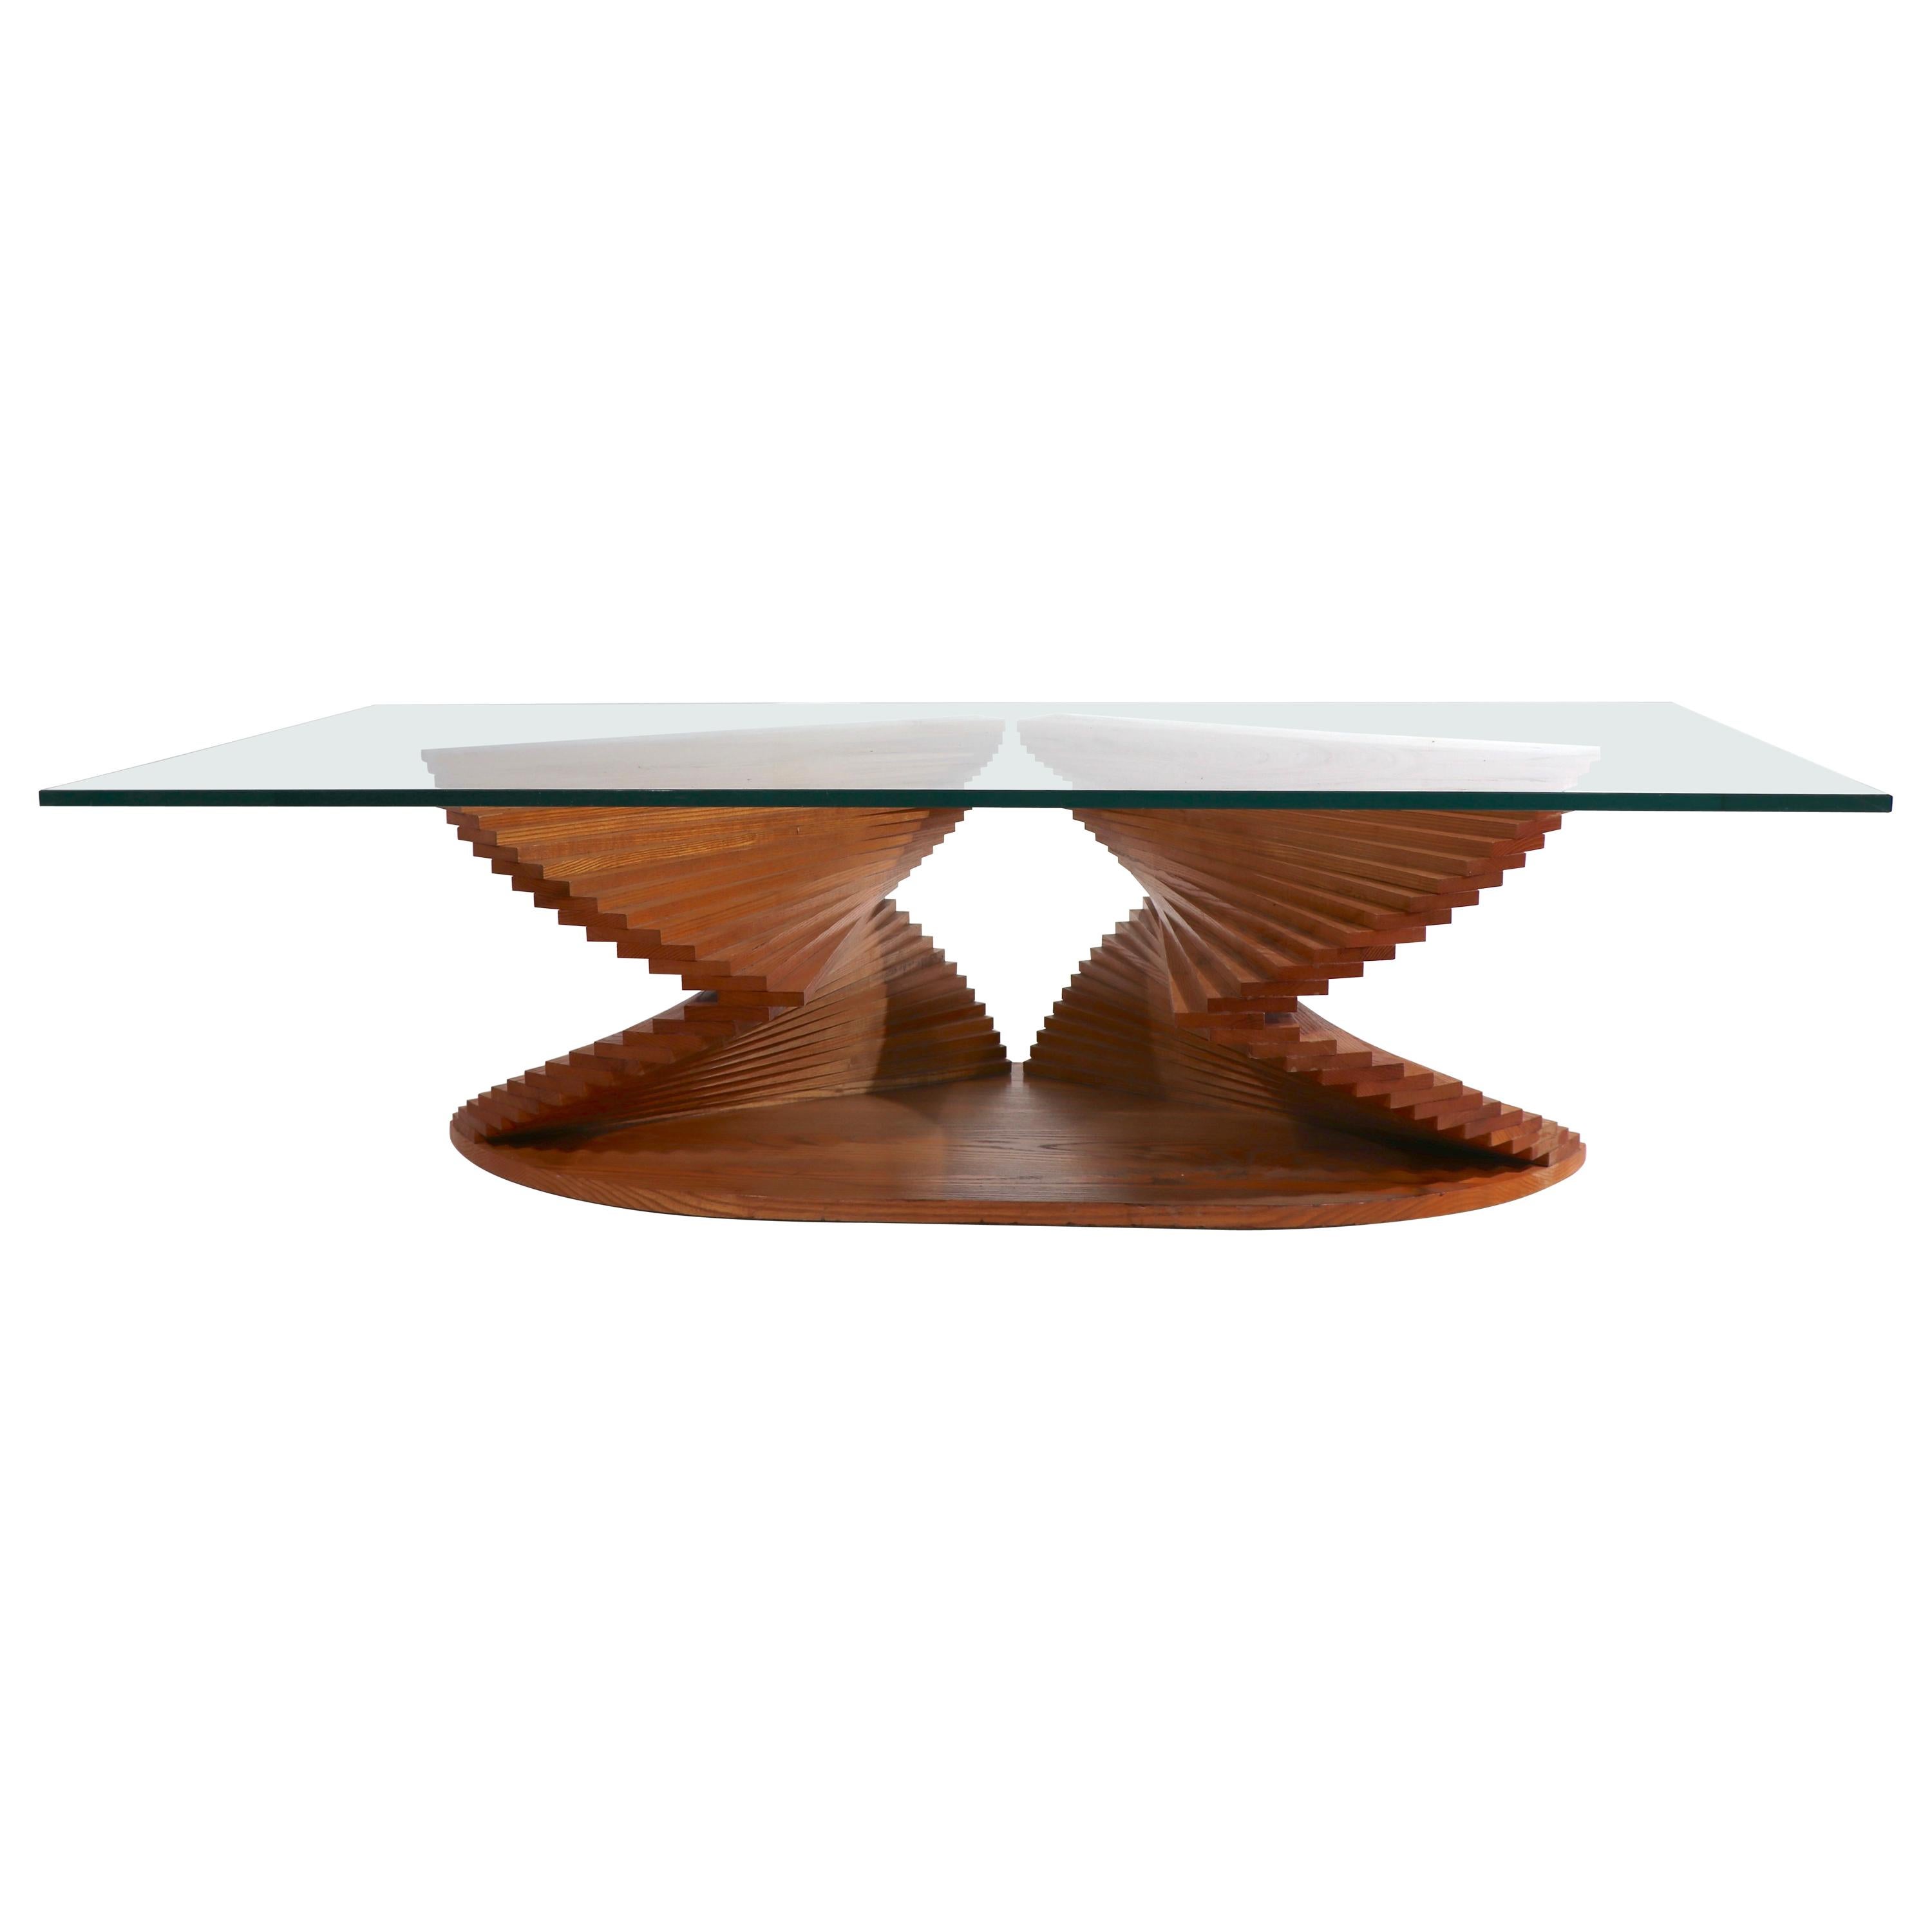 Modernist Folky Stepped Helix Form Coffee Table Base